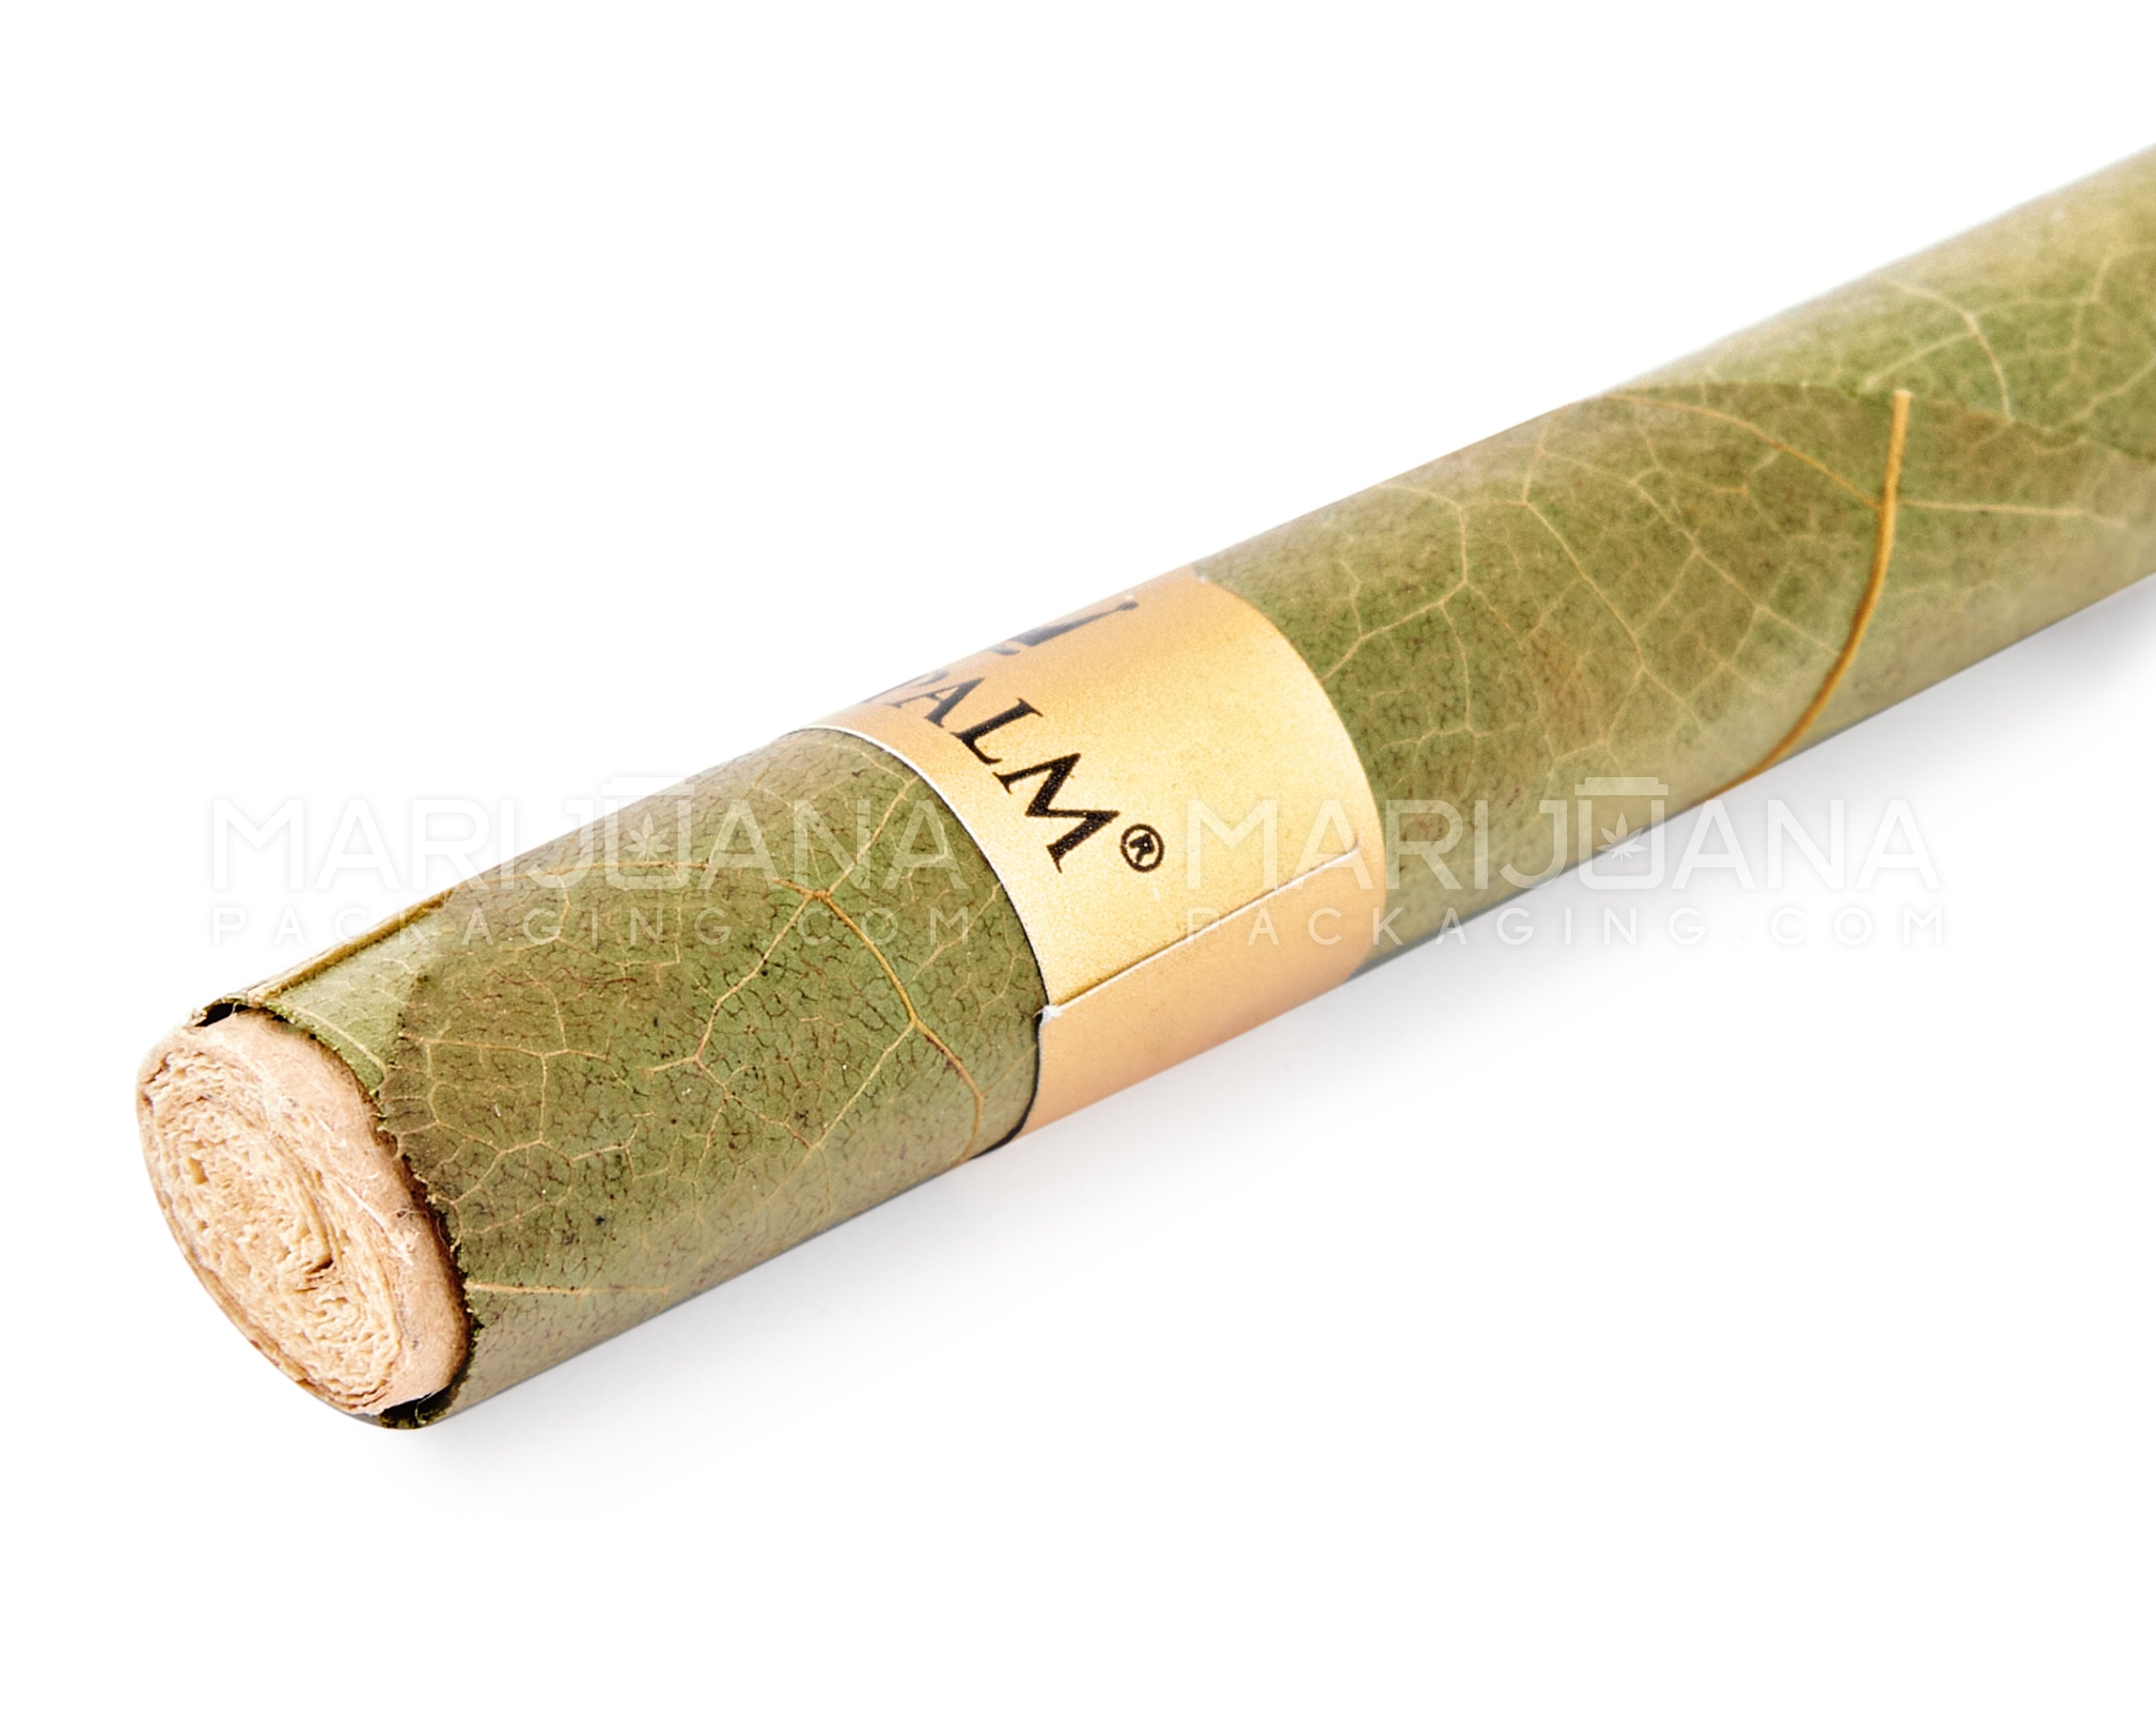 KING PALM | 'Retail Display' Rollie Green Natural Leaf Blunt Wraps | 54mm - Peach Tree - 20 Count